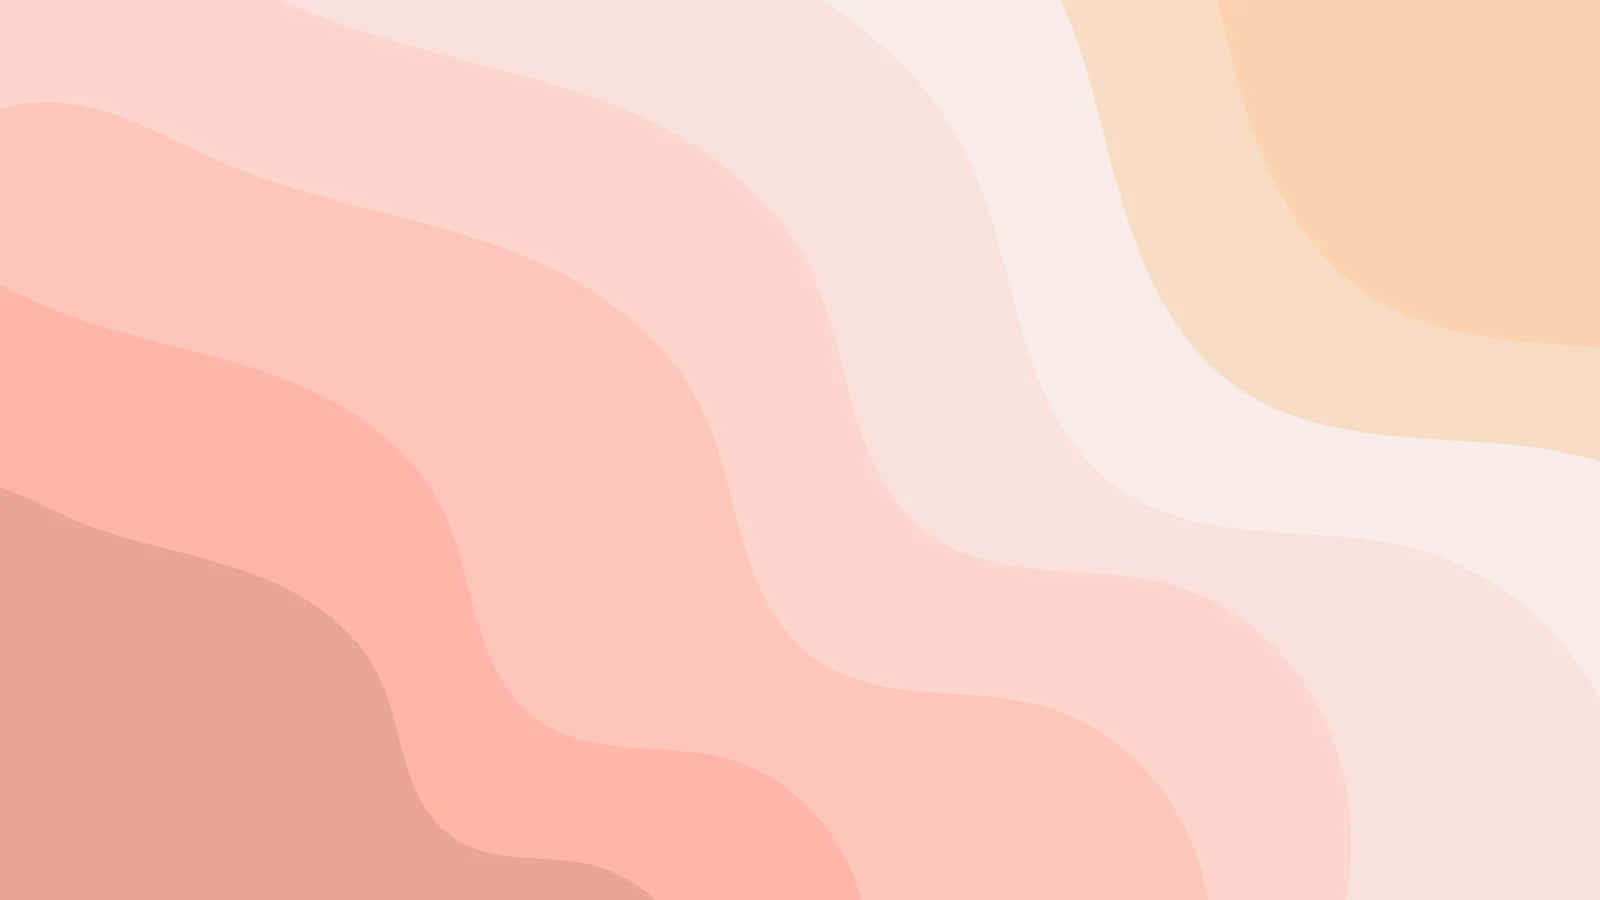 Abstract Pink Orange Waves Background Wallpaper